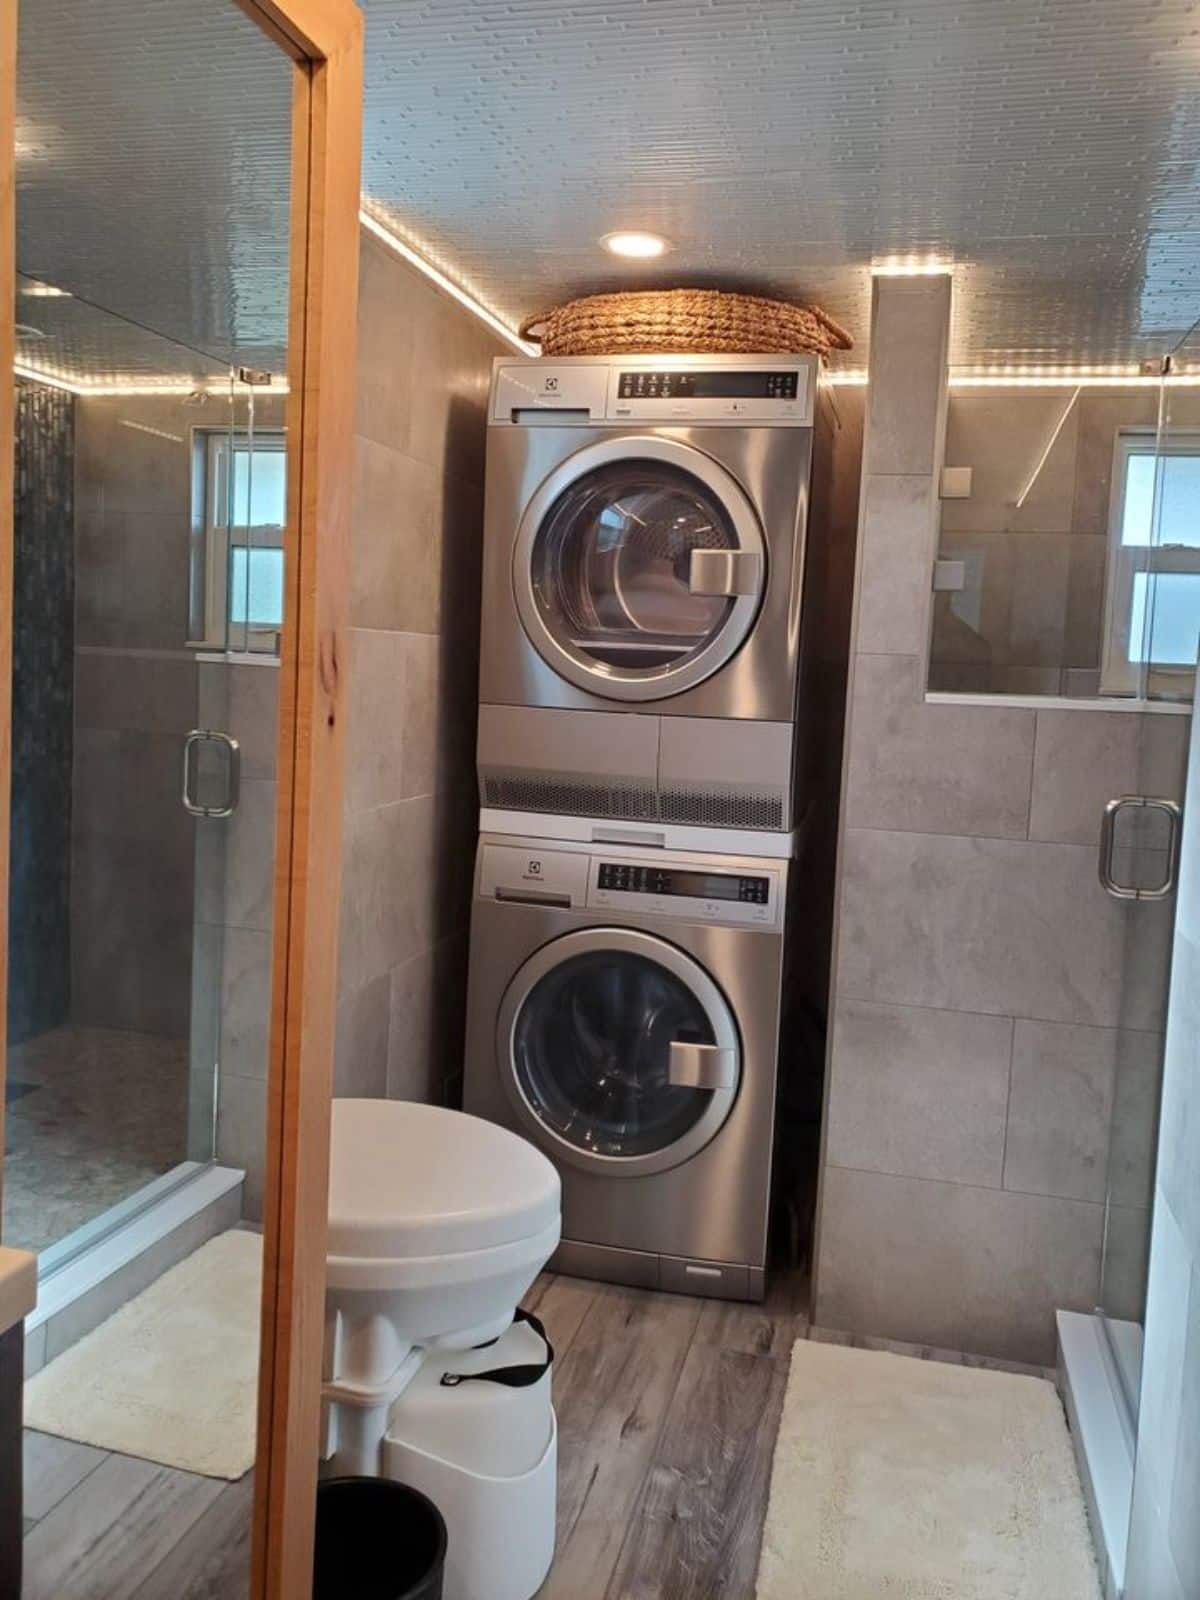 washer dryer combo in bathroom of 30’ luxury tiny house on wheels